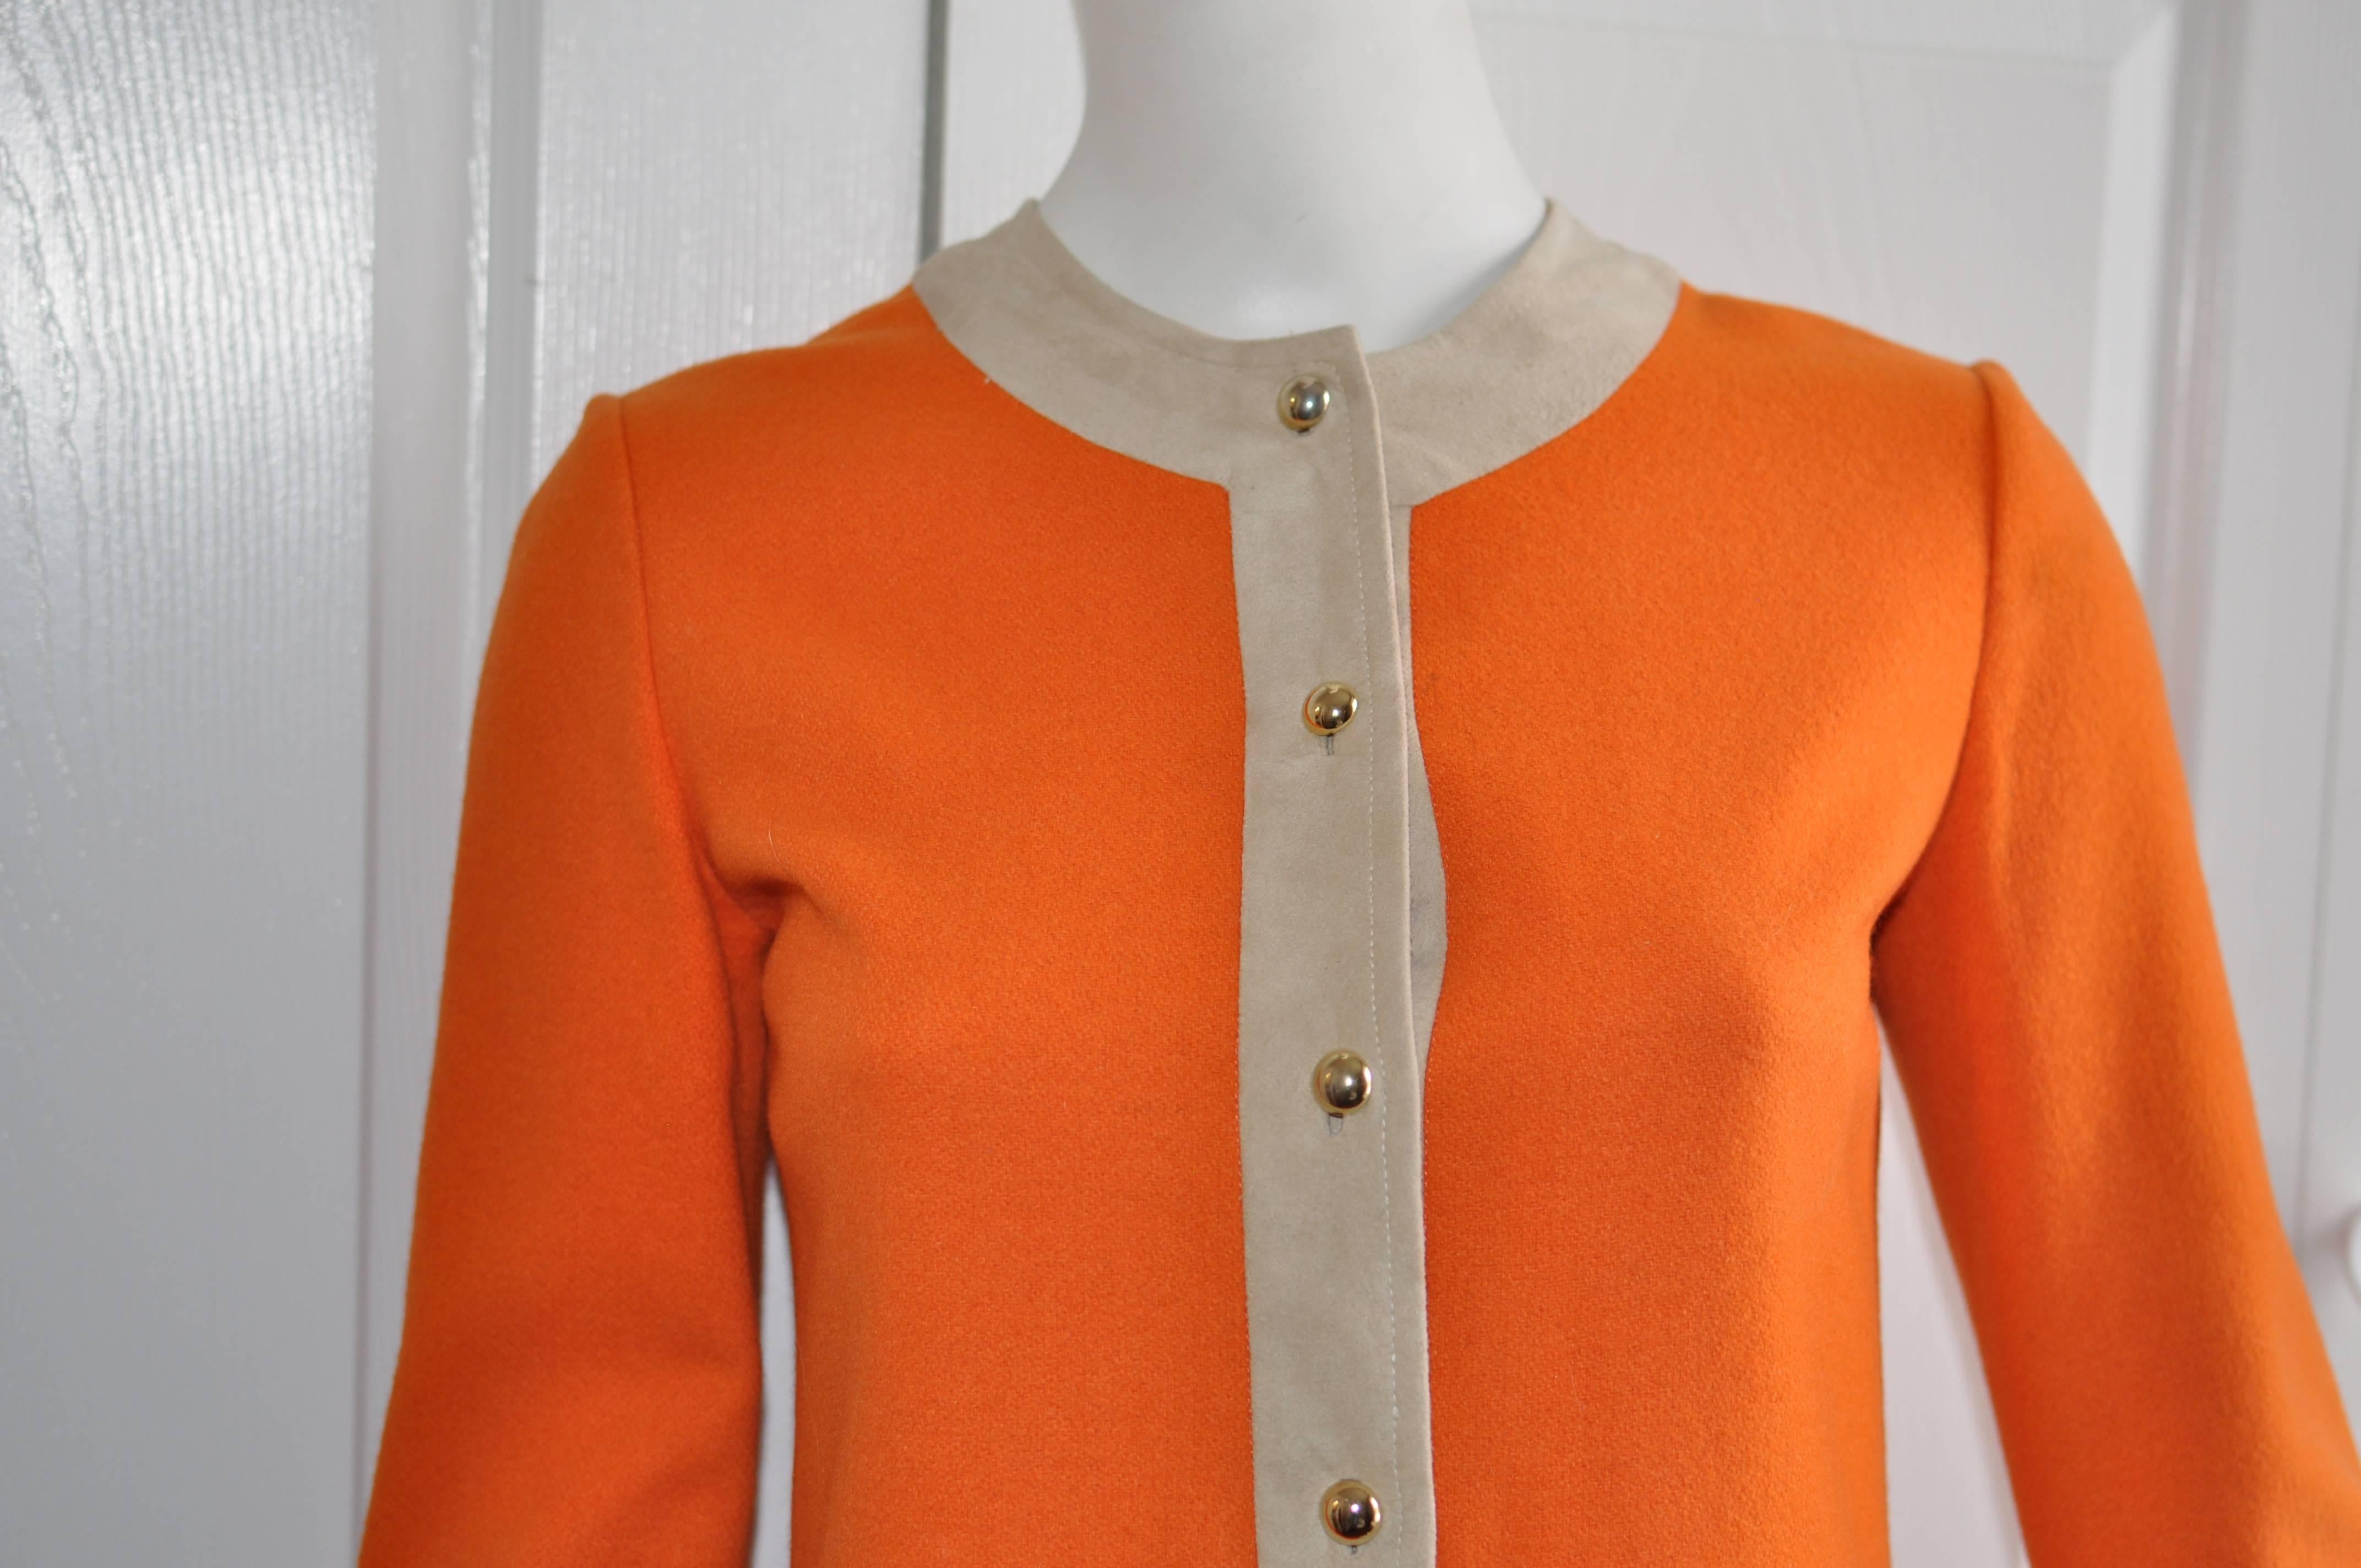 This wool shift dress was carried by Eaton's Chelsea Place Room and was designed and manufactured in France, Although there is no designer label, it is reminiscent of Cardin and Courreges.

The  burnt orange dress is trimmed with beige suede; has an